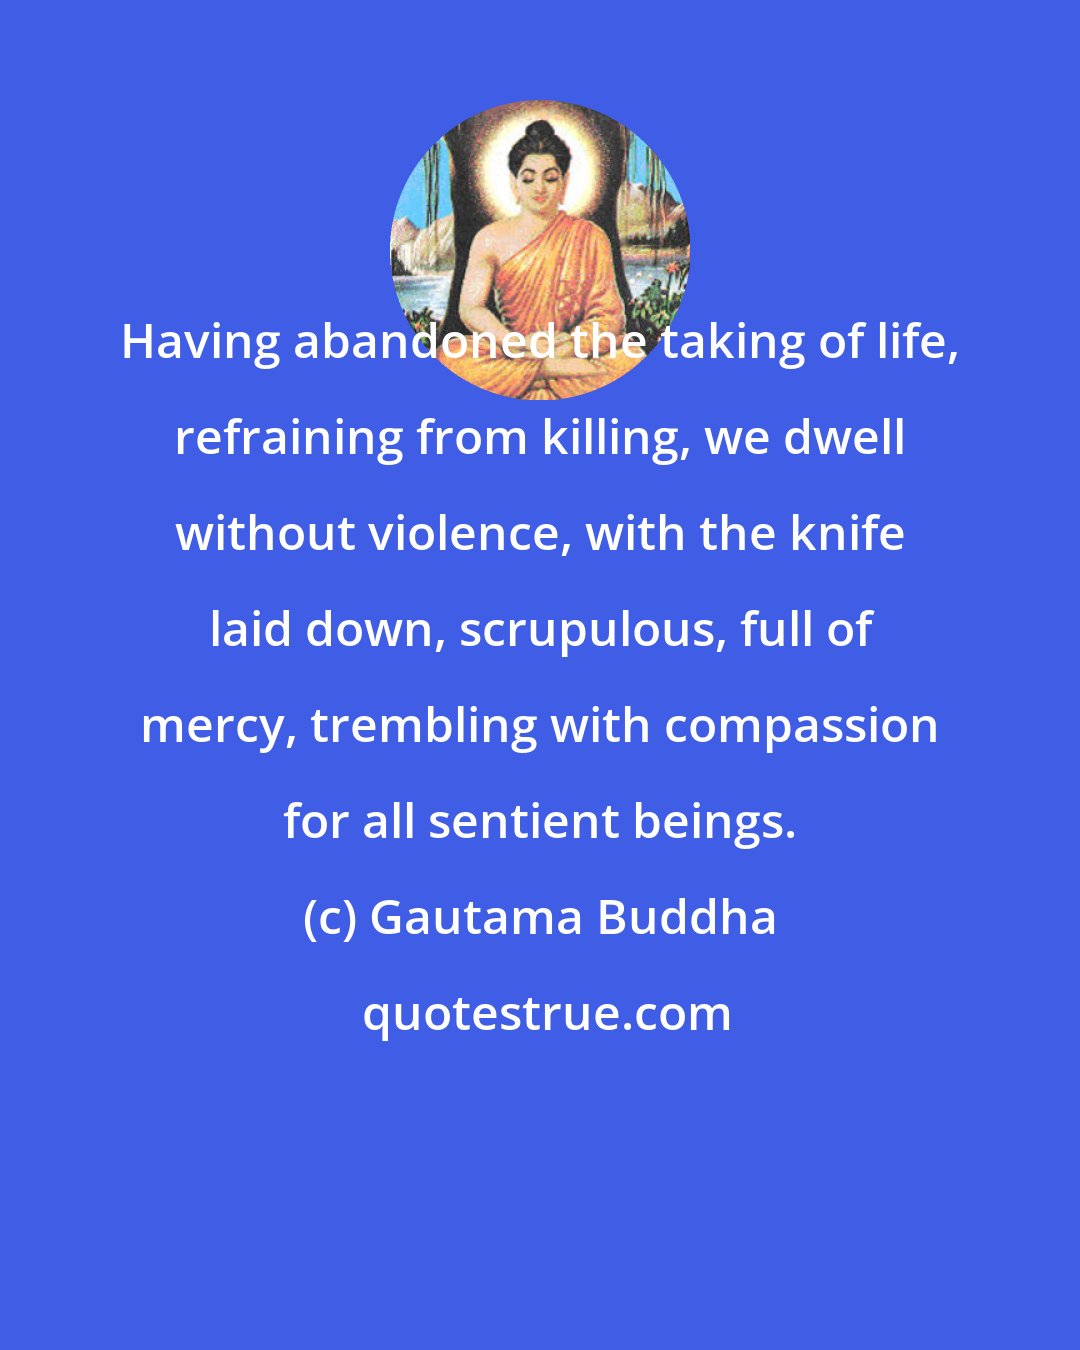 Gautama Buddha: Having abandoned the taking of life, refraining from killing, we dwell without violence, with the knife laid down, scrupulous, full of mercy, trembling with compassion for all sentient beings.